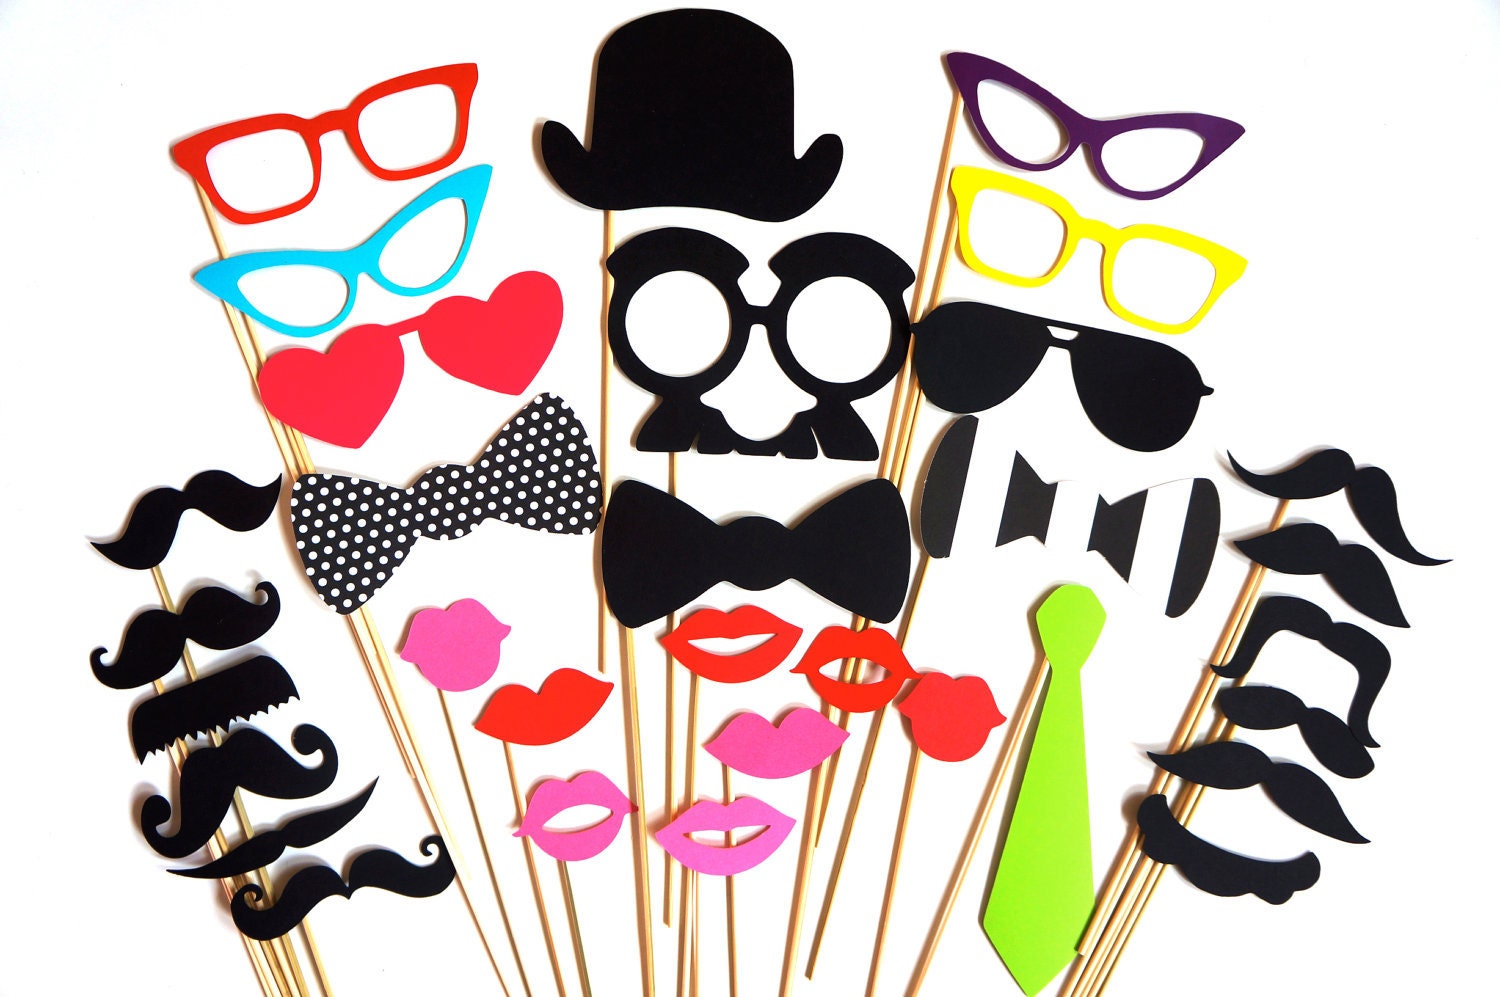 SALE - Cool Photo Booth Prop Set - 32 pieces on a stick - Birthdays, Weddings, Parties - Great Photobooth Props